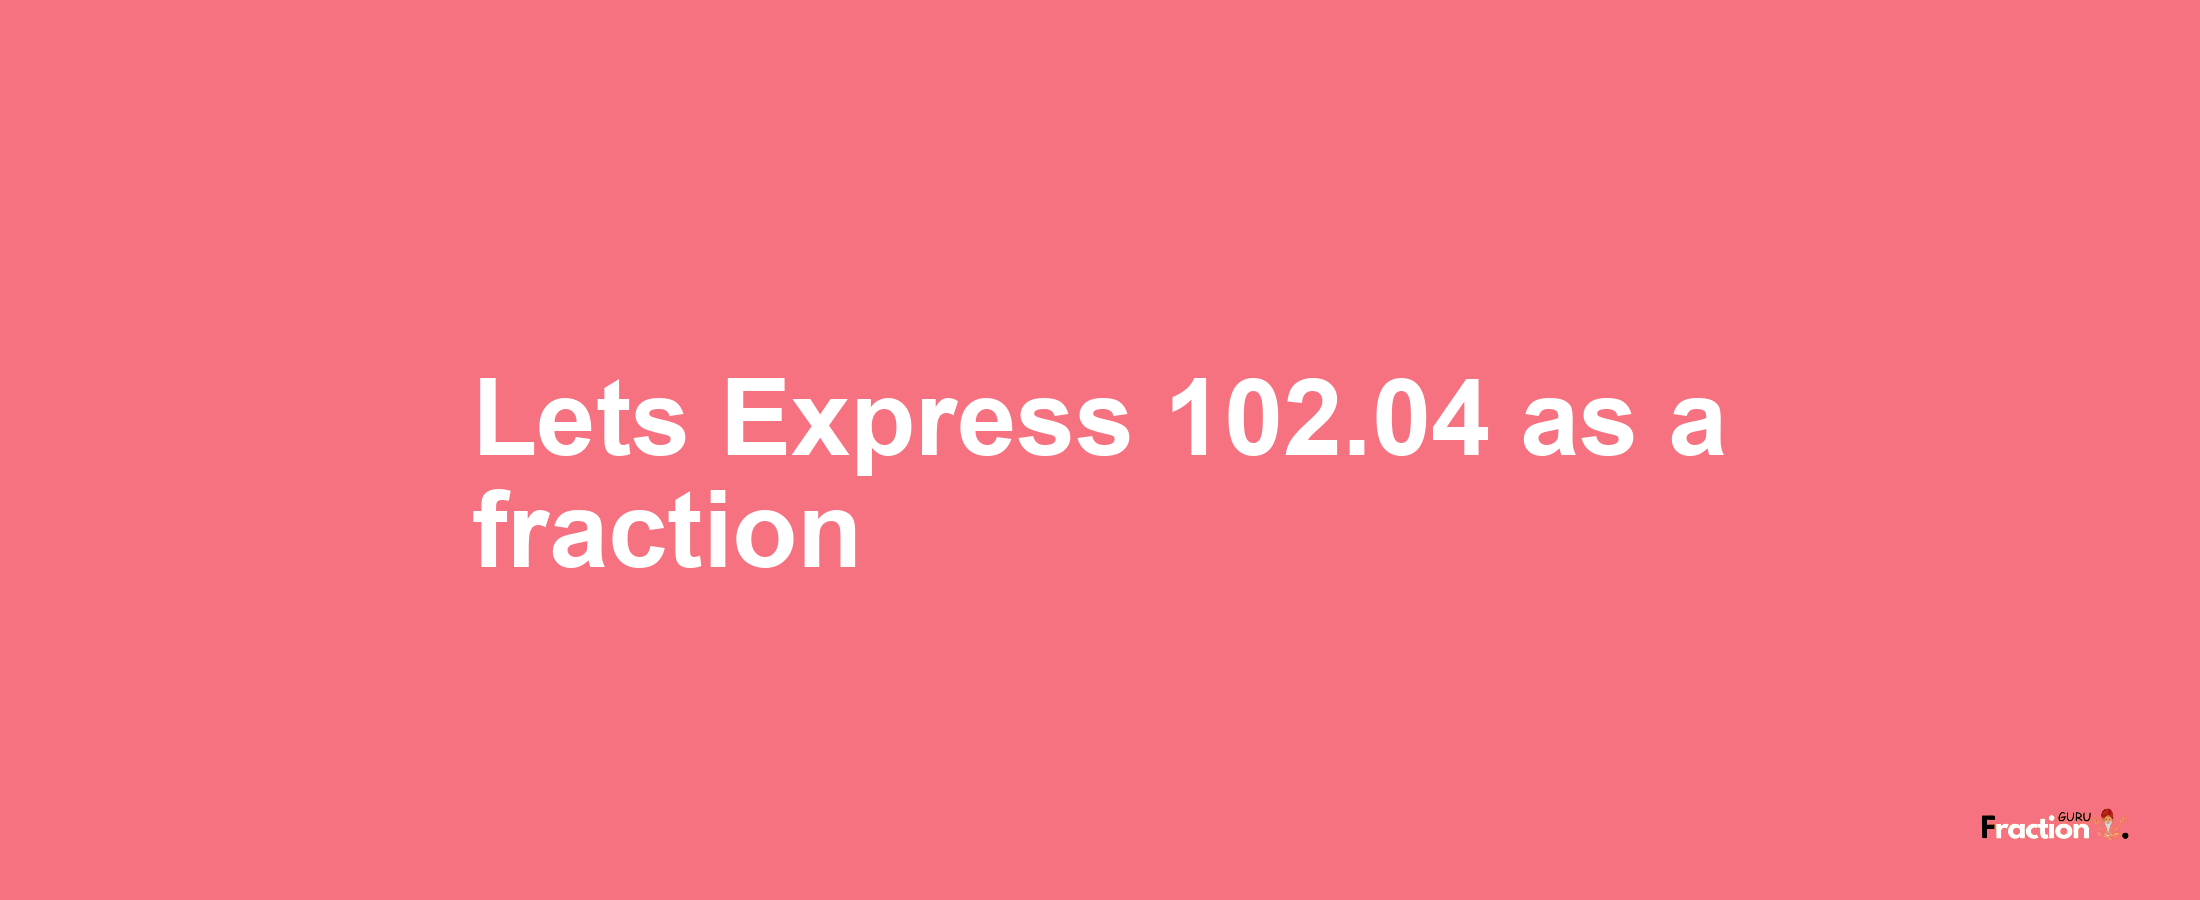 Lets Express 102.04 as afraction